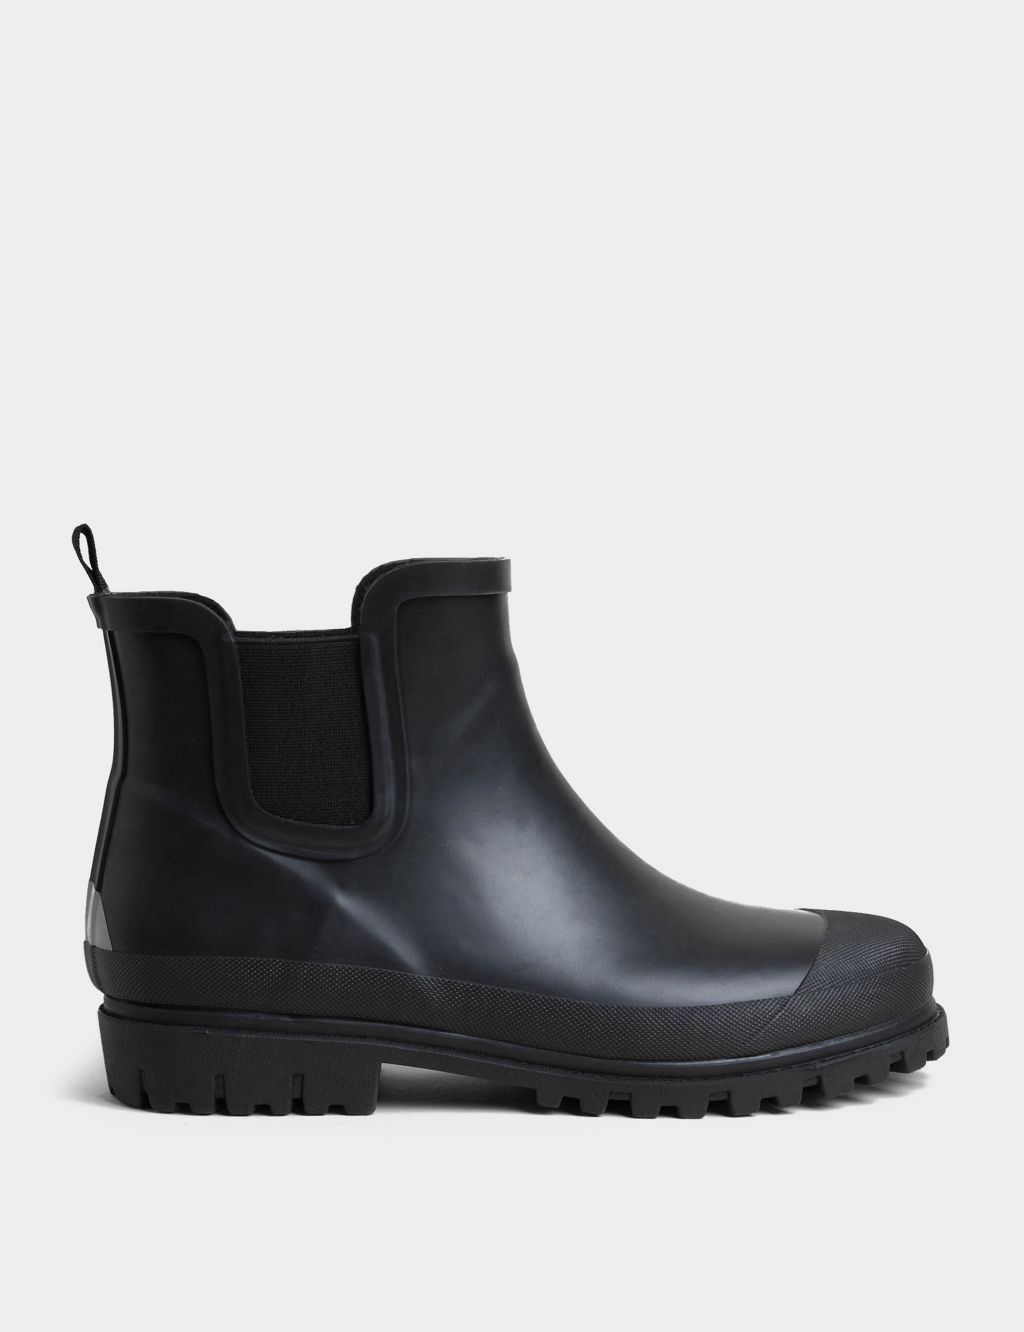 Waterproof Pull-On Chelsea Boots image 1